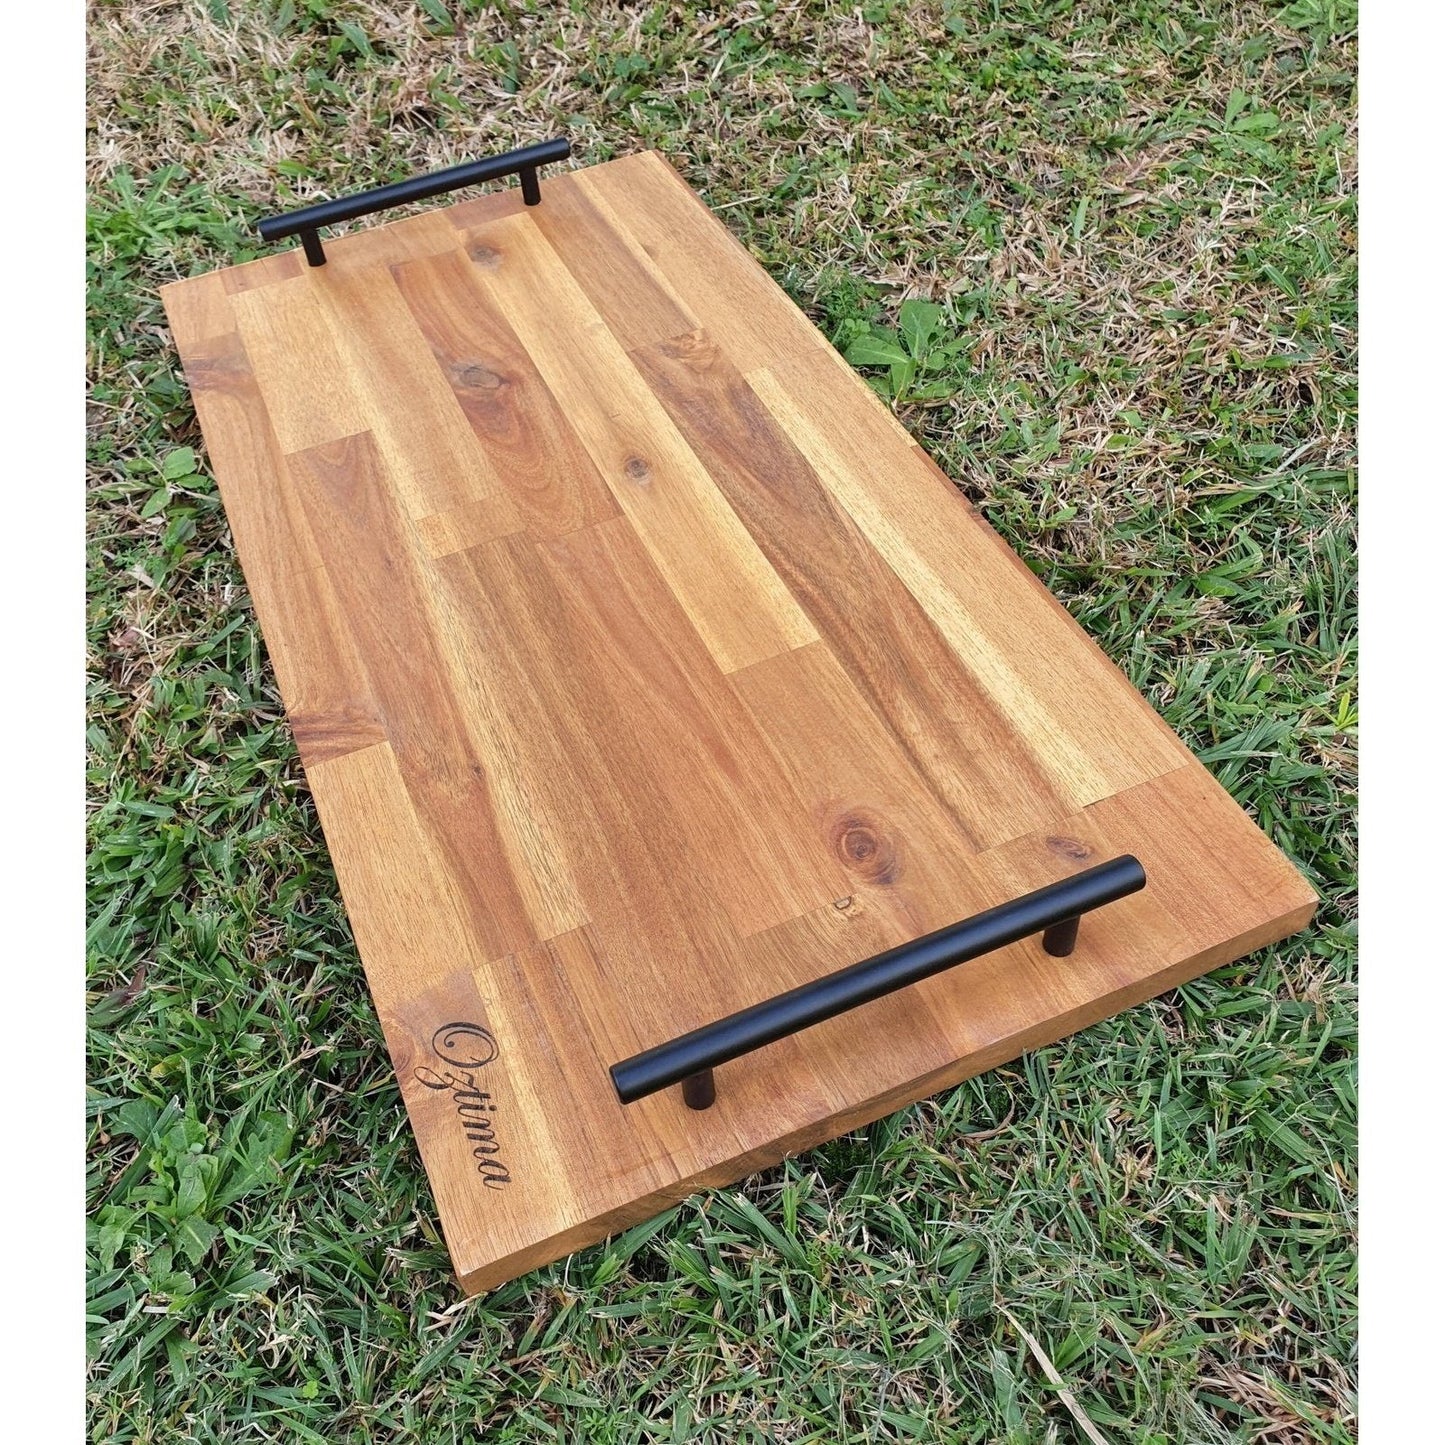 Grazing Board / Serving Platter with Handles 600mm x 300mm - AMD Touring